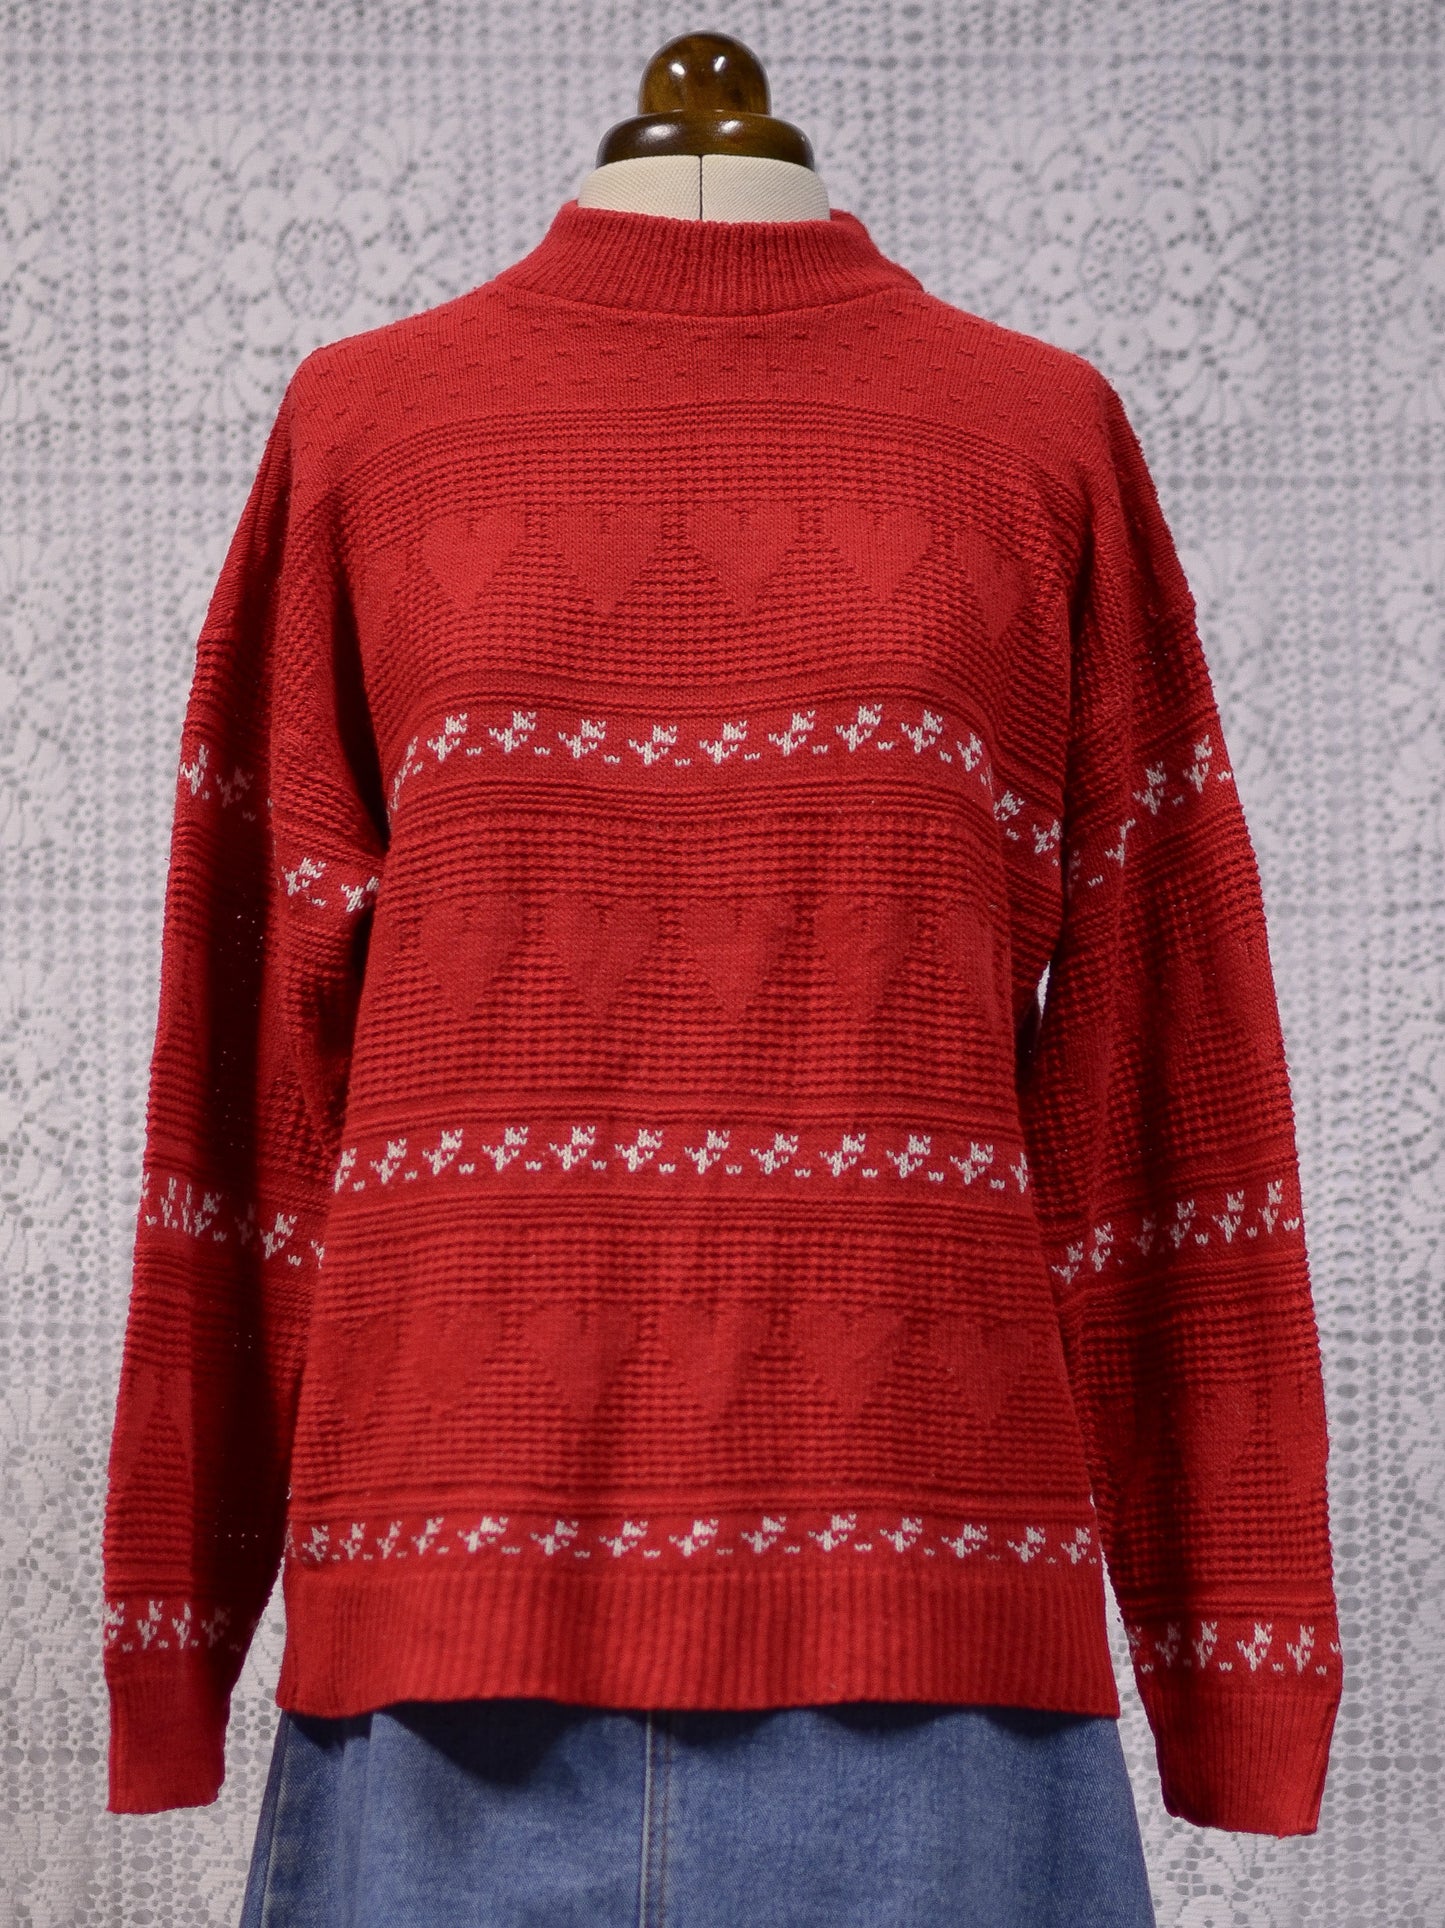 1980s red and white heart print high neck jumper